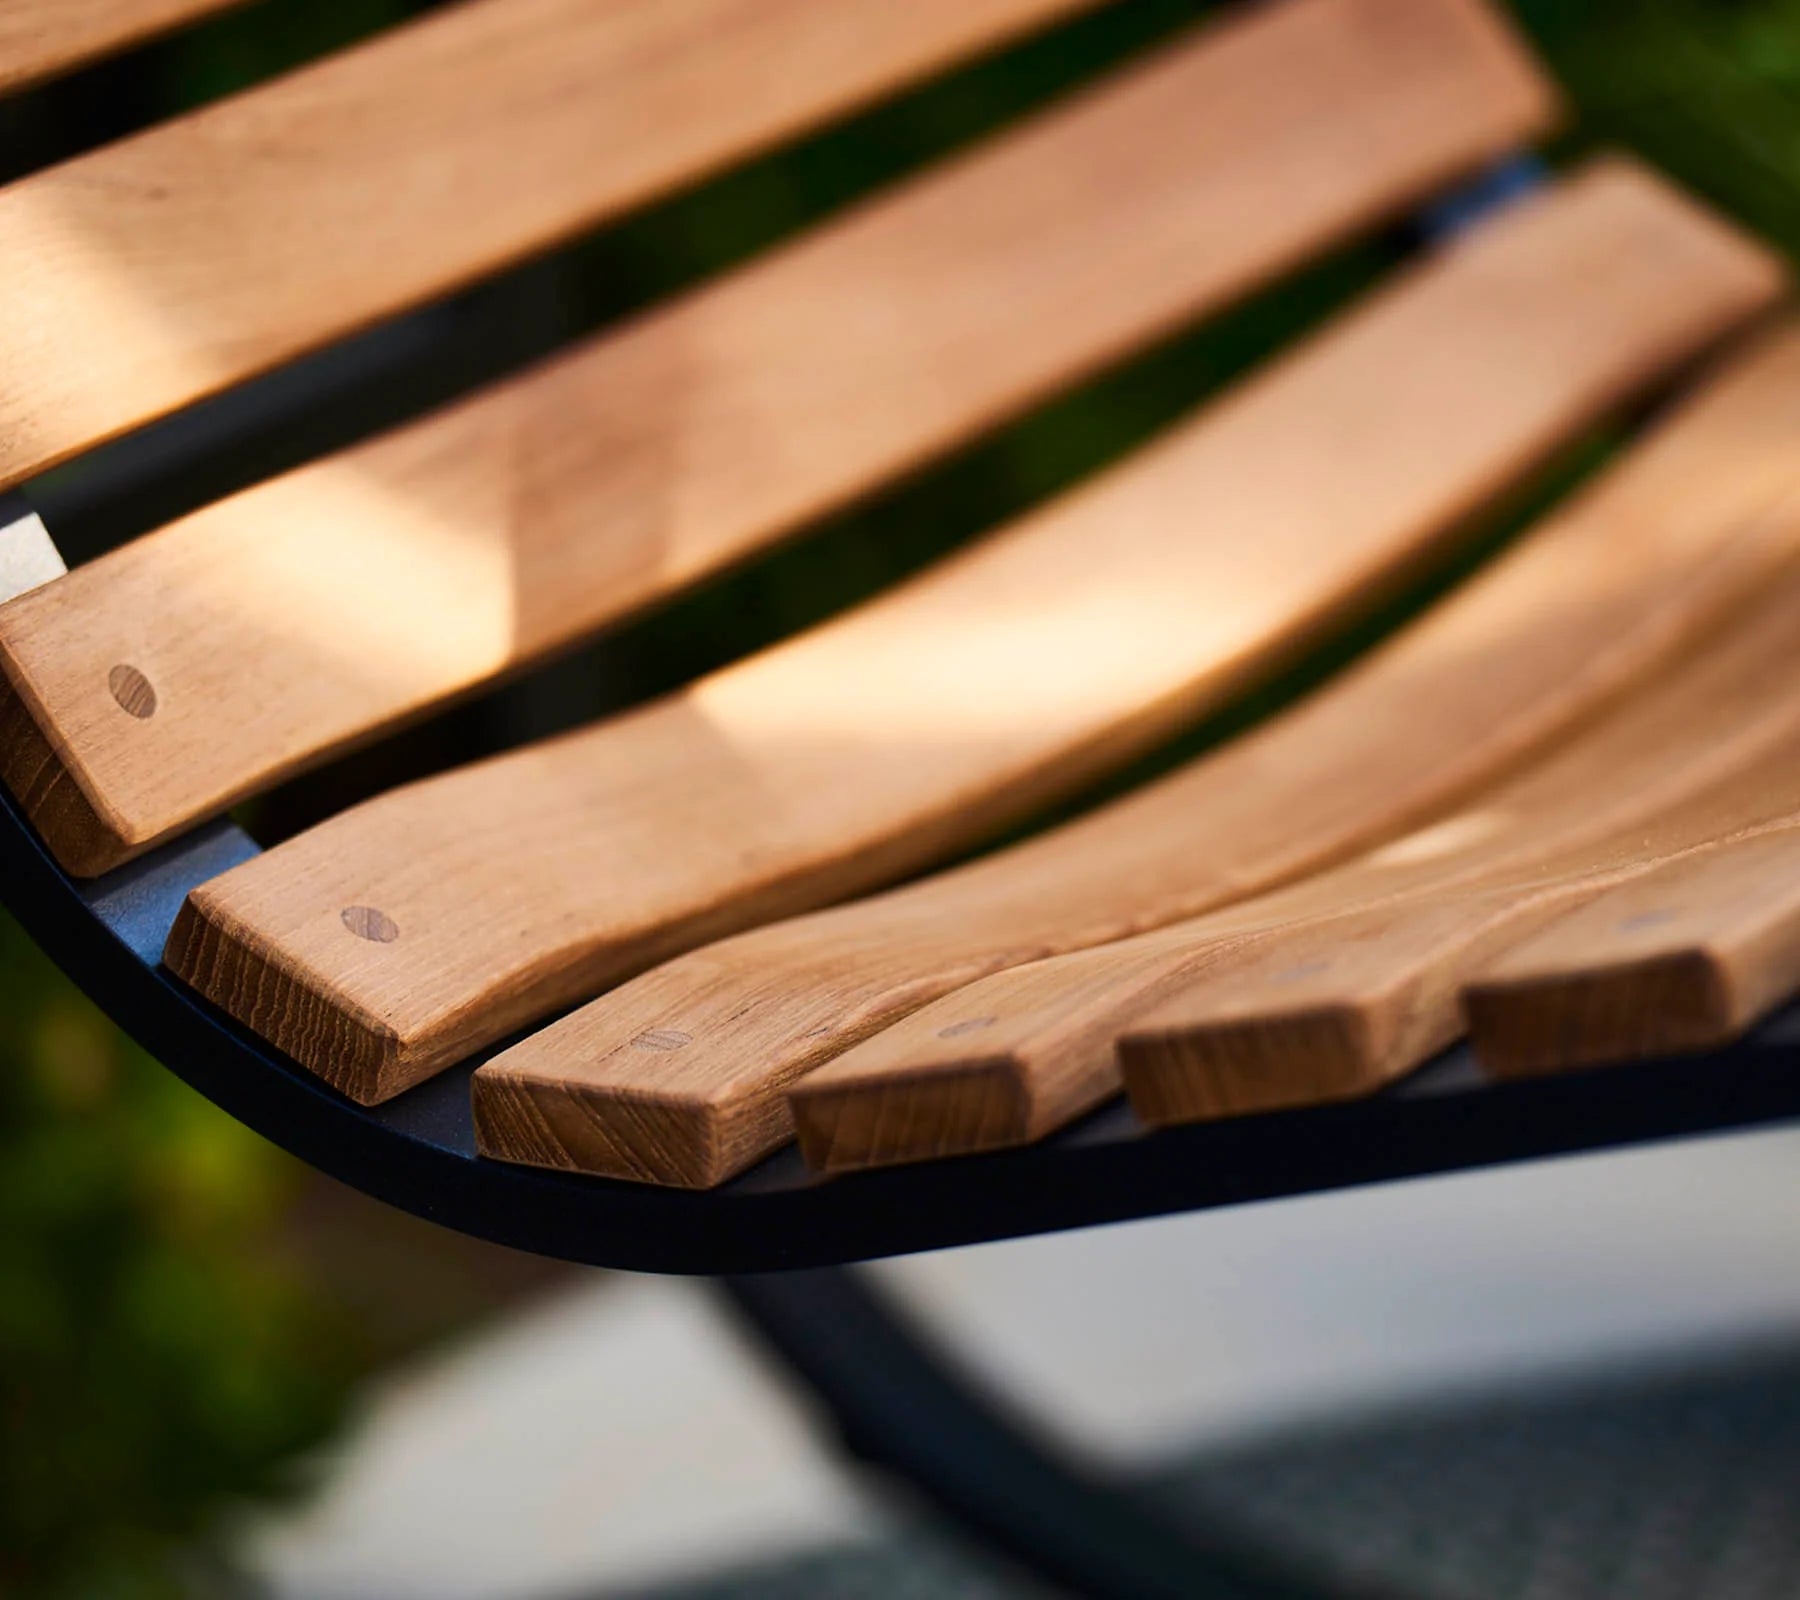 Boxhill's Parc teak outdoor rocking chair close up view